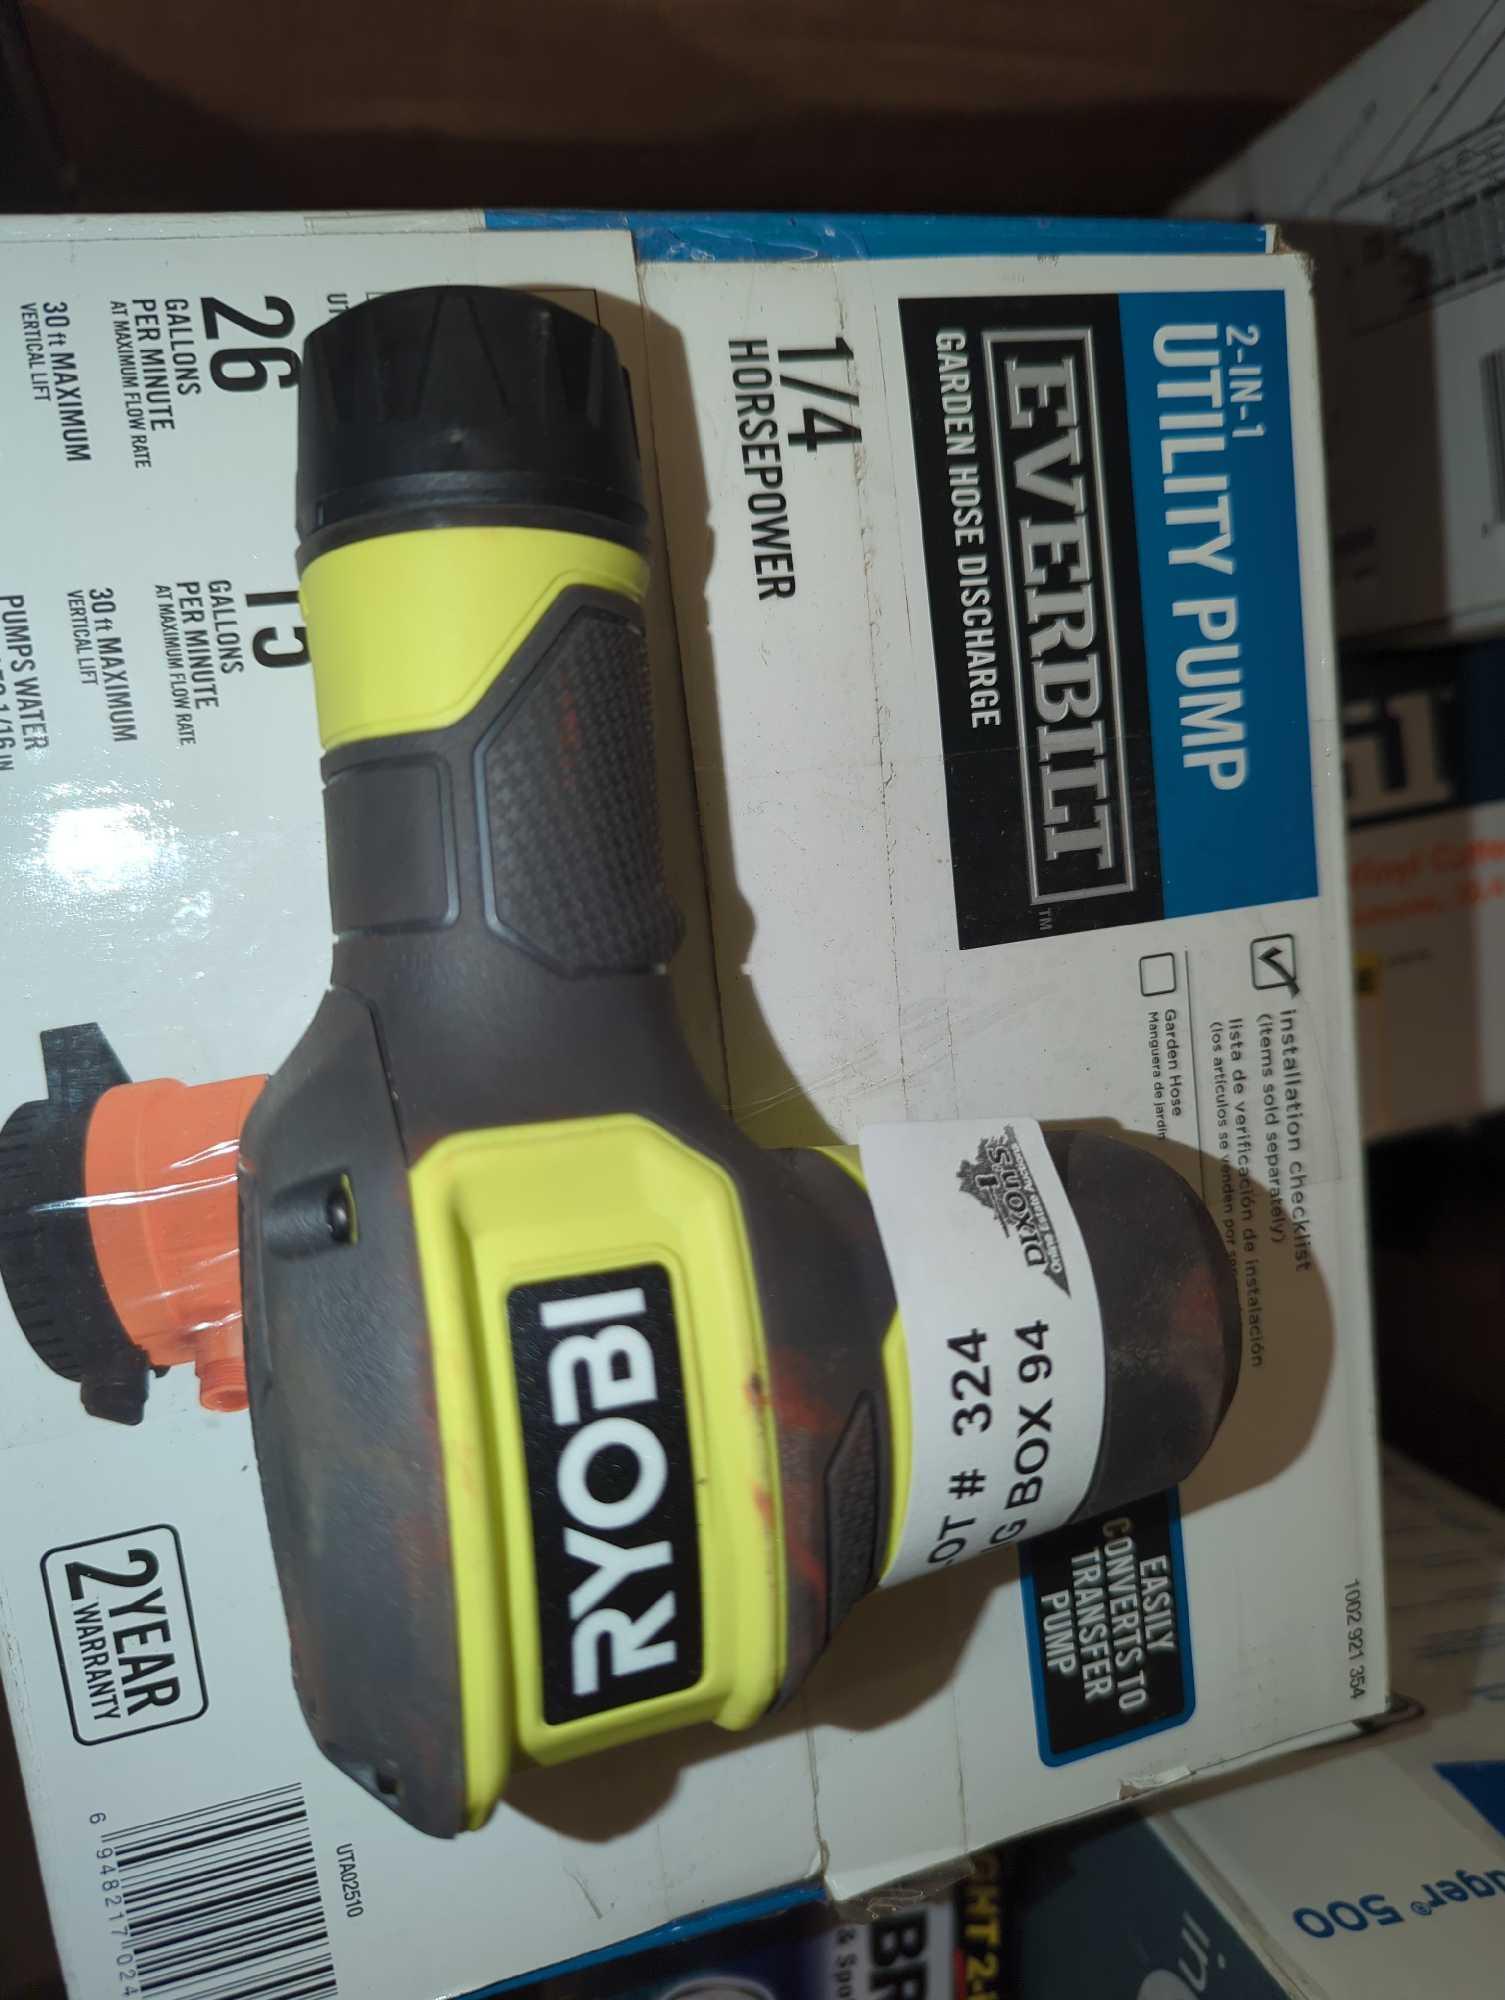 RYOBI (Tool ONLY) USB Lithium Compact Scrubber, Retail Price $60, Appears to be Used, No Battery or